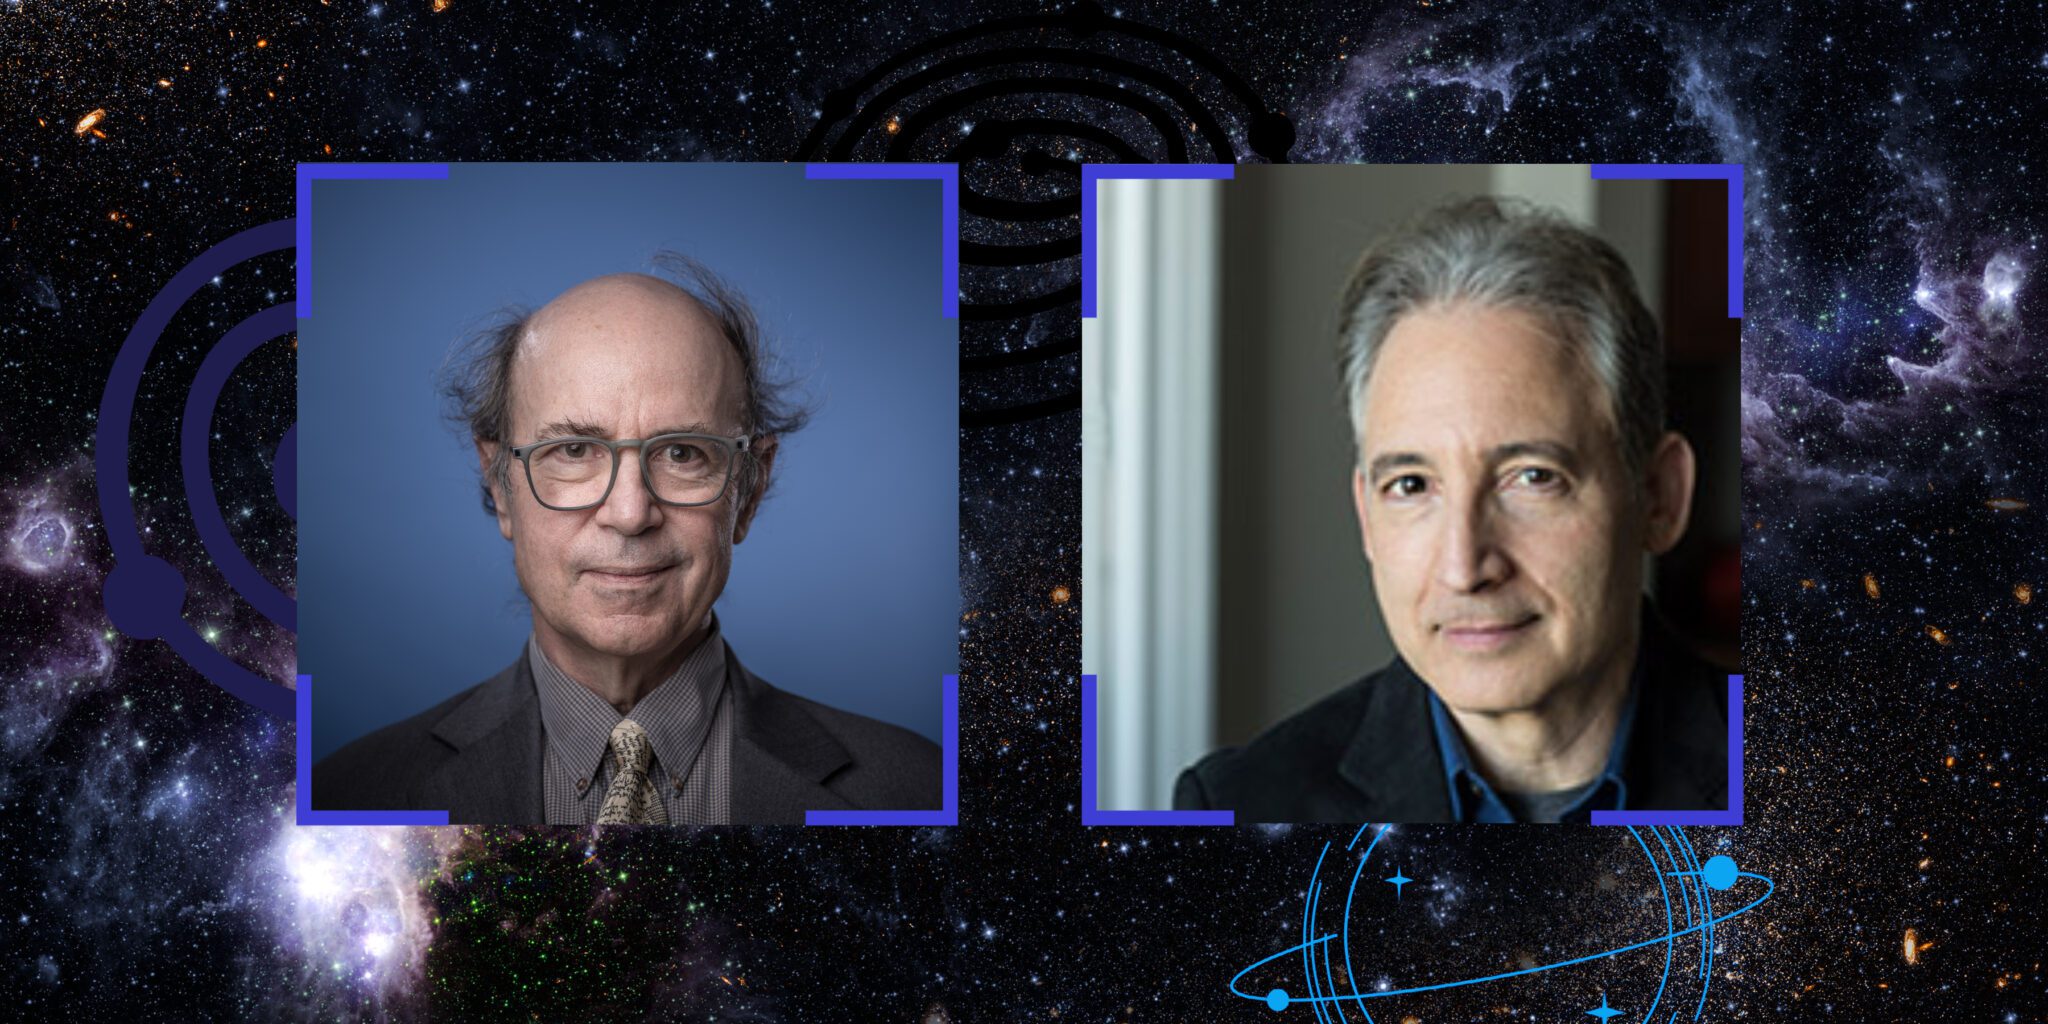 WATCH: Two Leading Physicists Investigate the Riddles of Reality